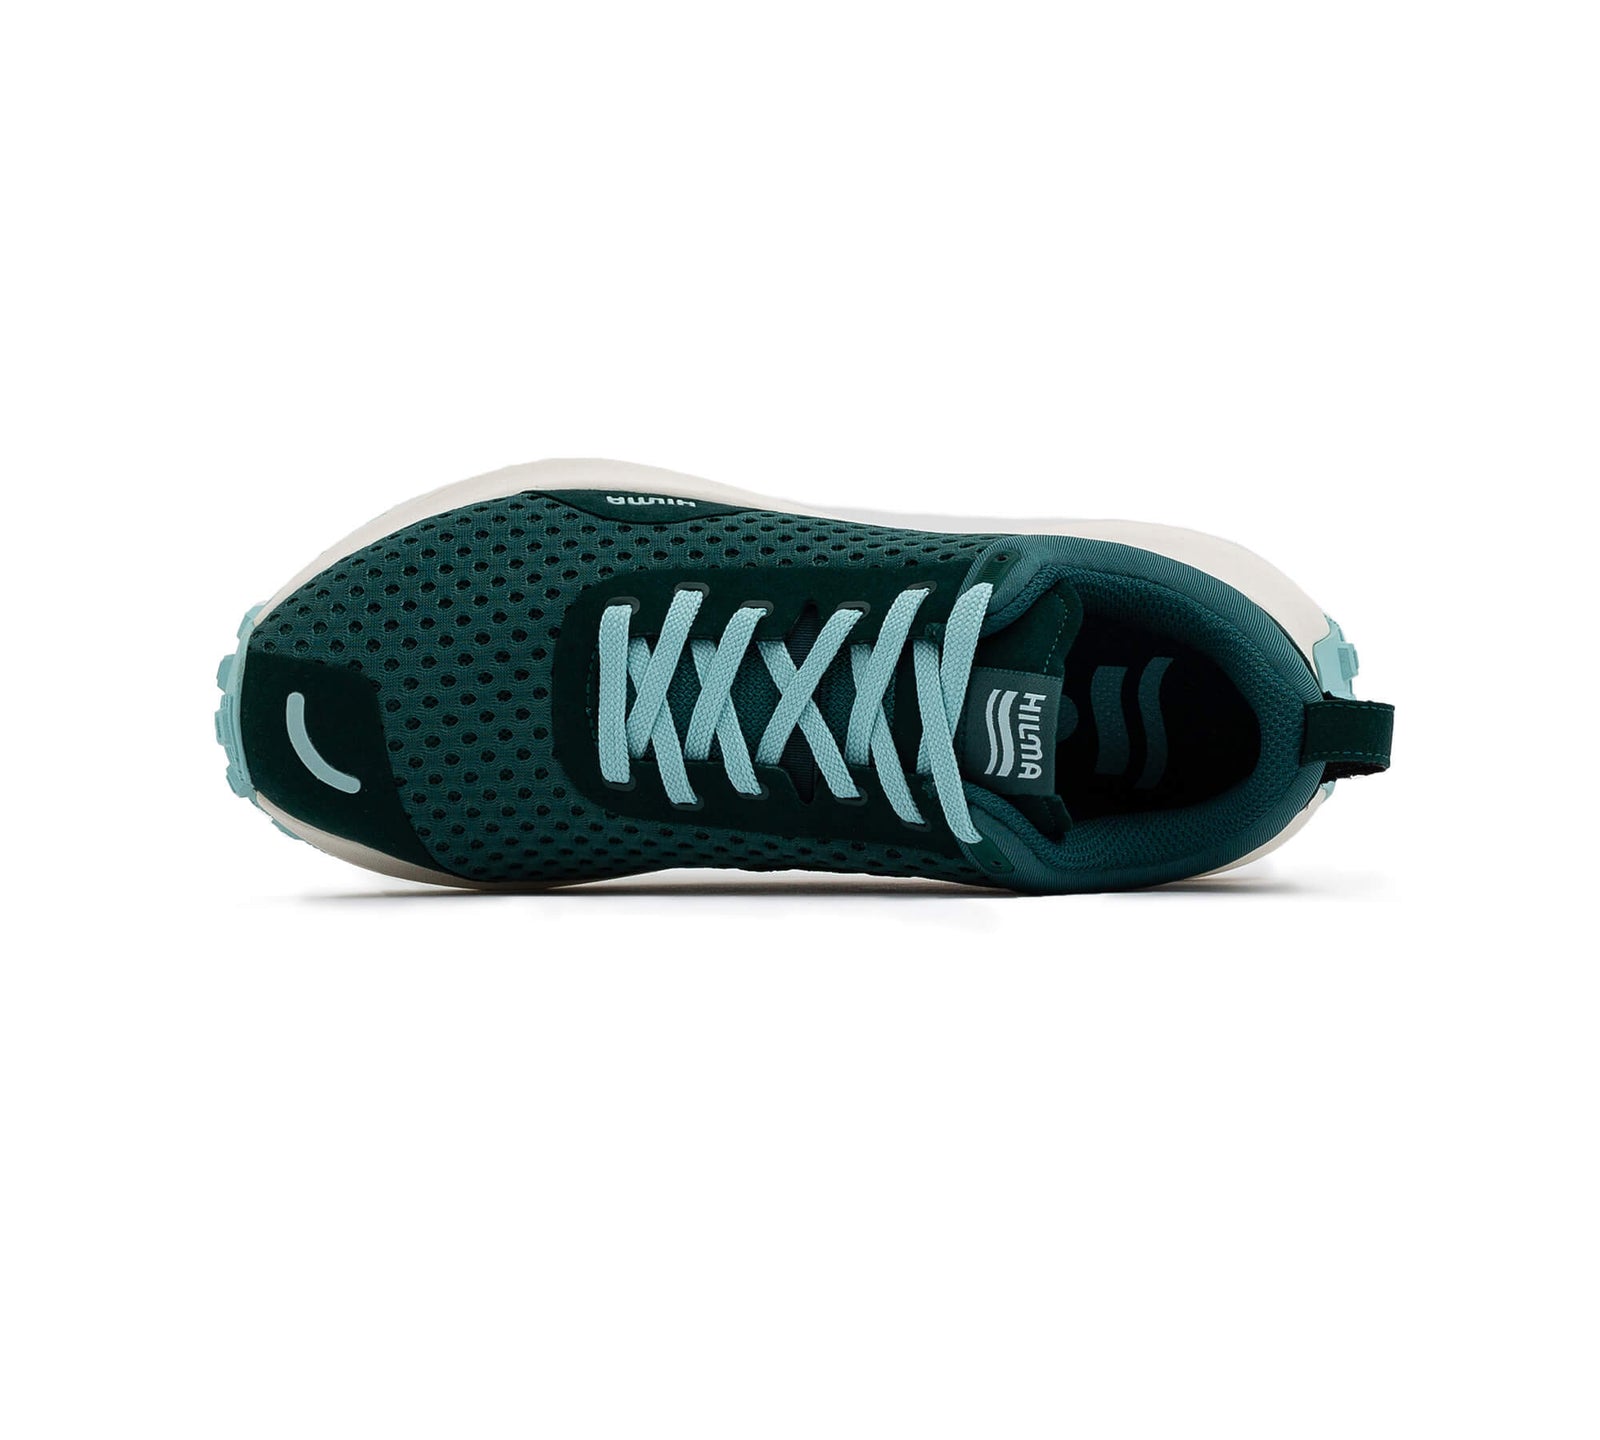 Top down view of right Everywhere Hilma Running shoe in Evergreen